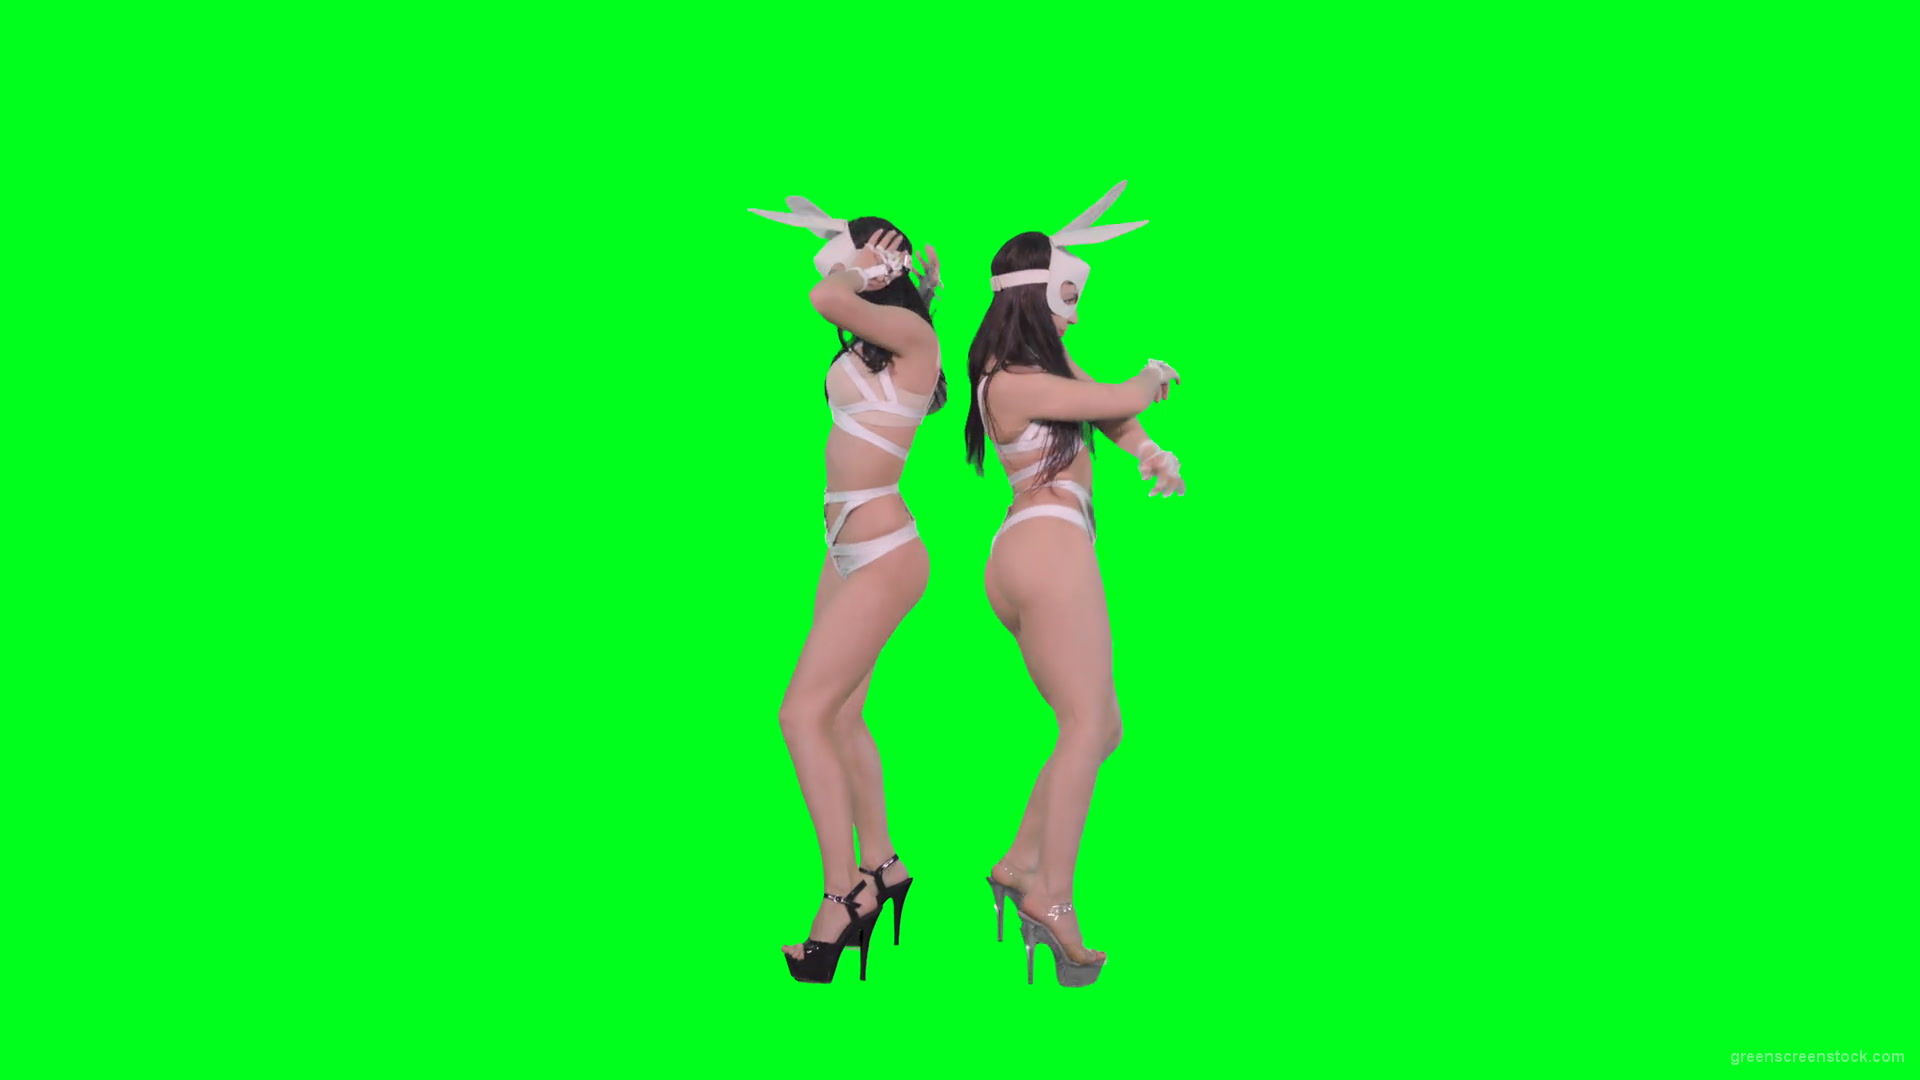 Go-Go-Dancing-female-team-duet-making-erotic-moves-on-green-screen-4K-Video-Footage-1920_007 Green Screen Stock